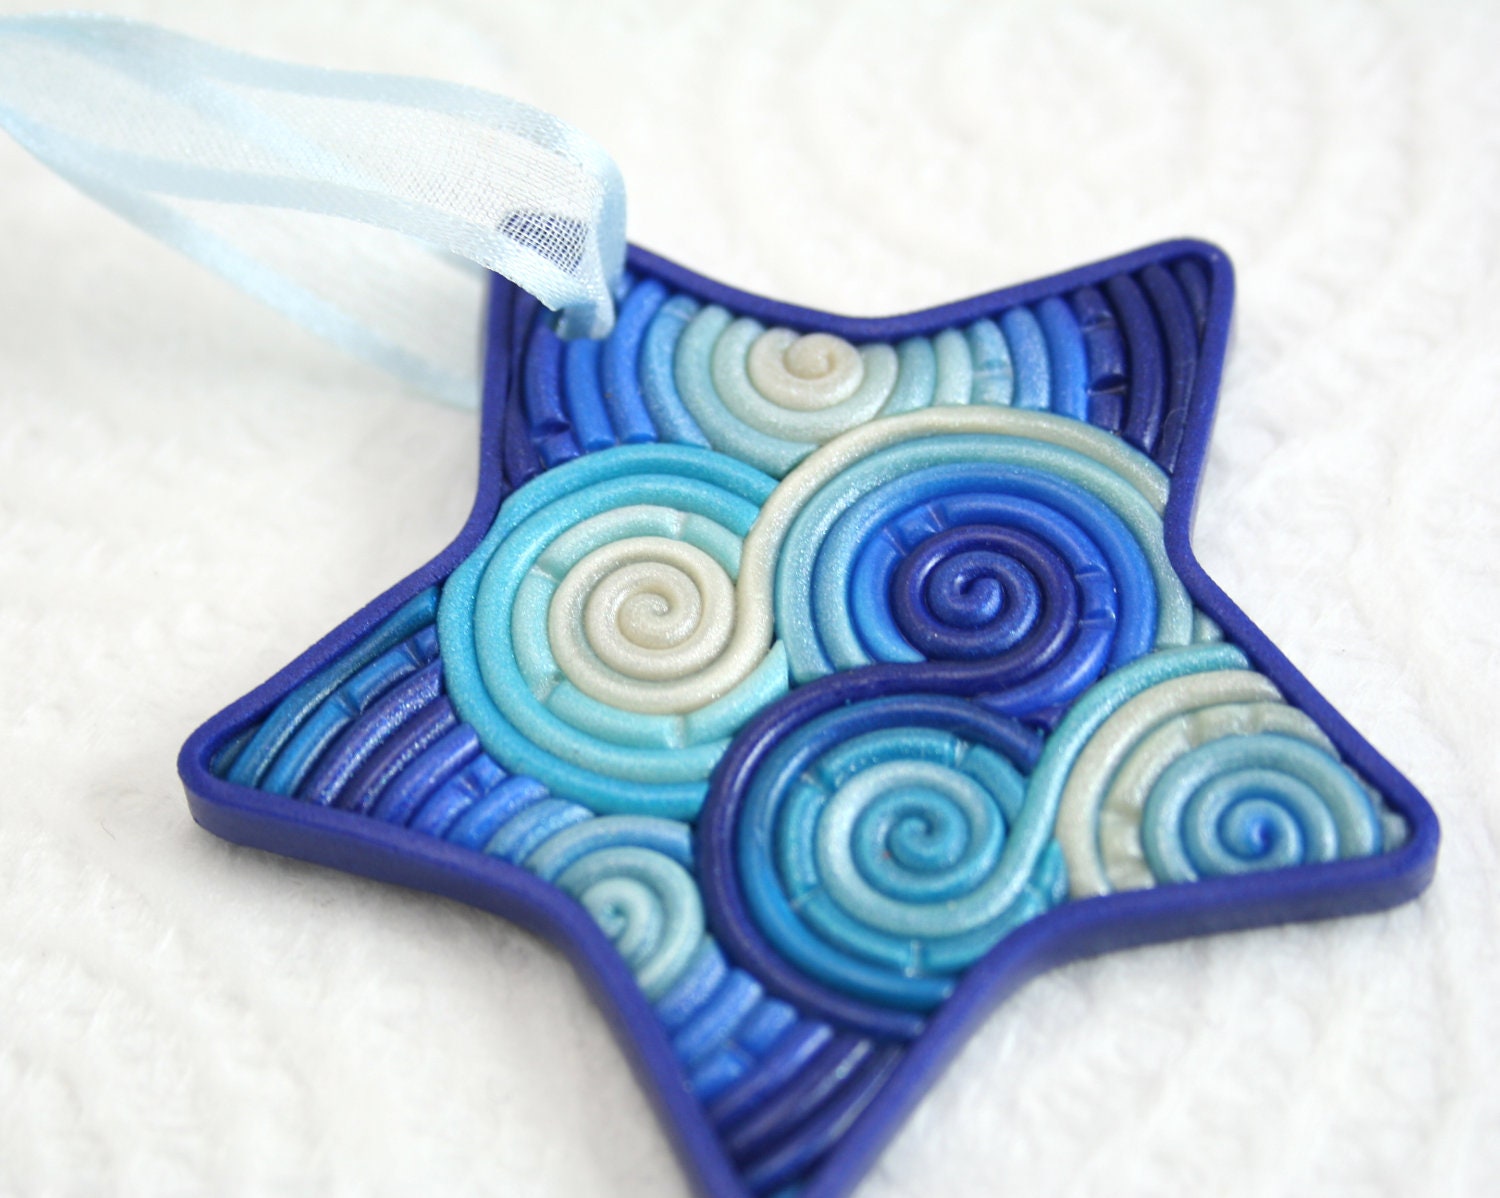 Star Christmas Ornament in Blue, Teal, White Polymer Clay Filigree